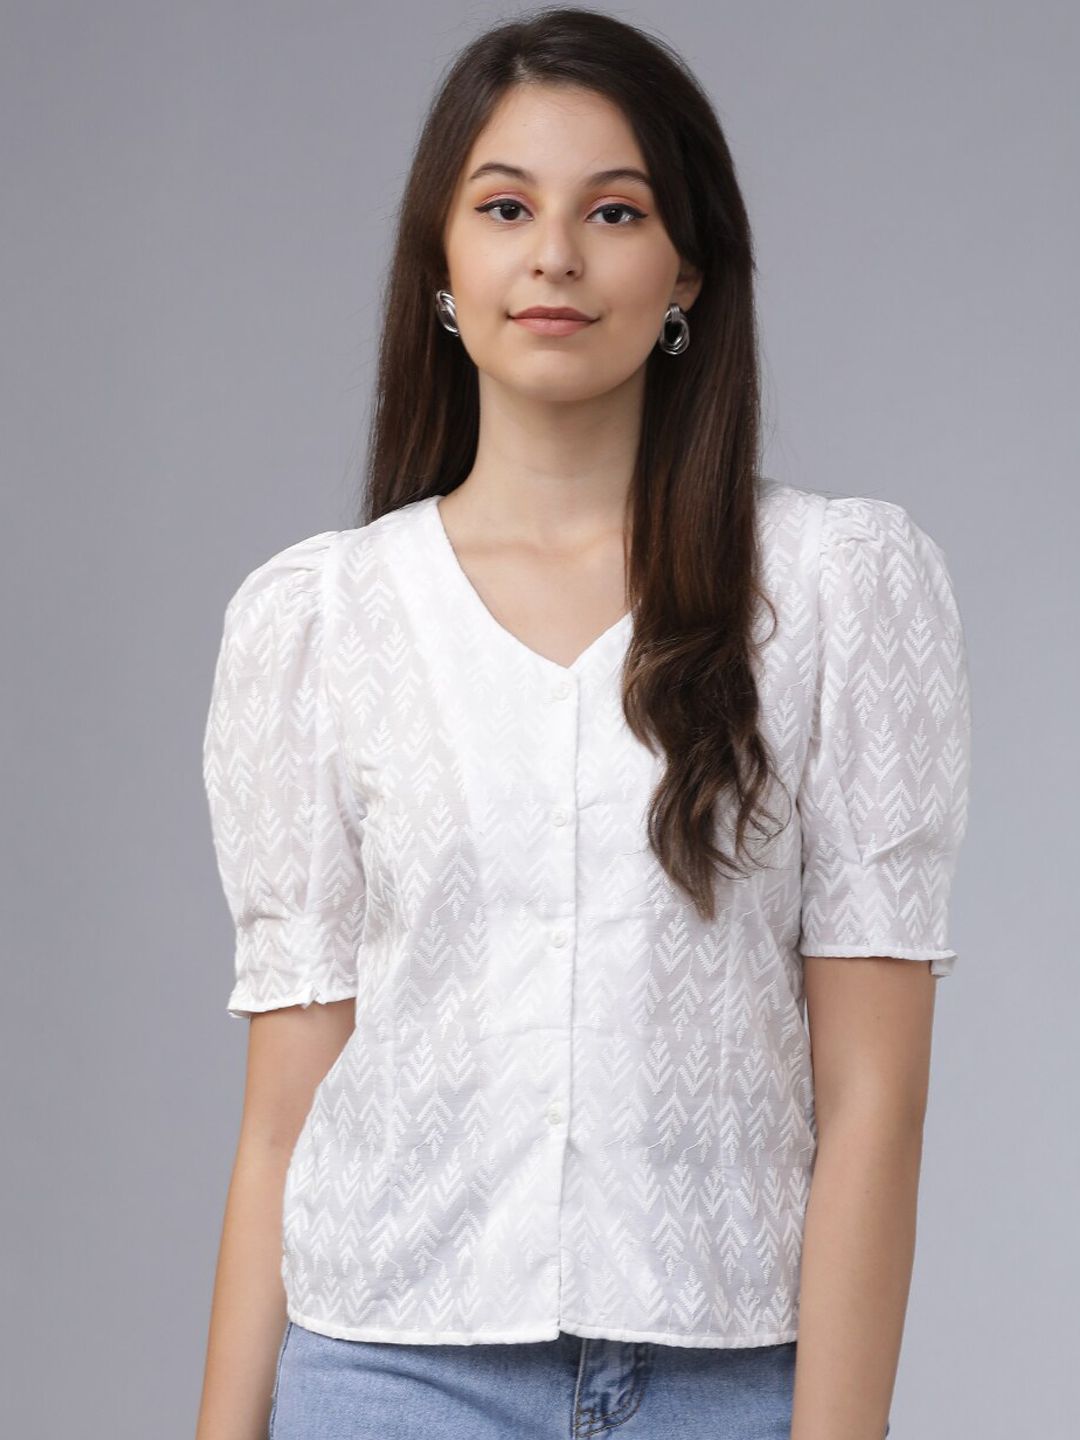 Tokyo Talkies Off-White Embroidered Top Price in India